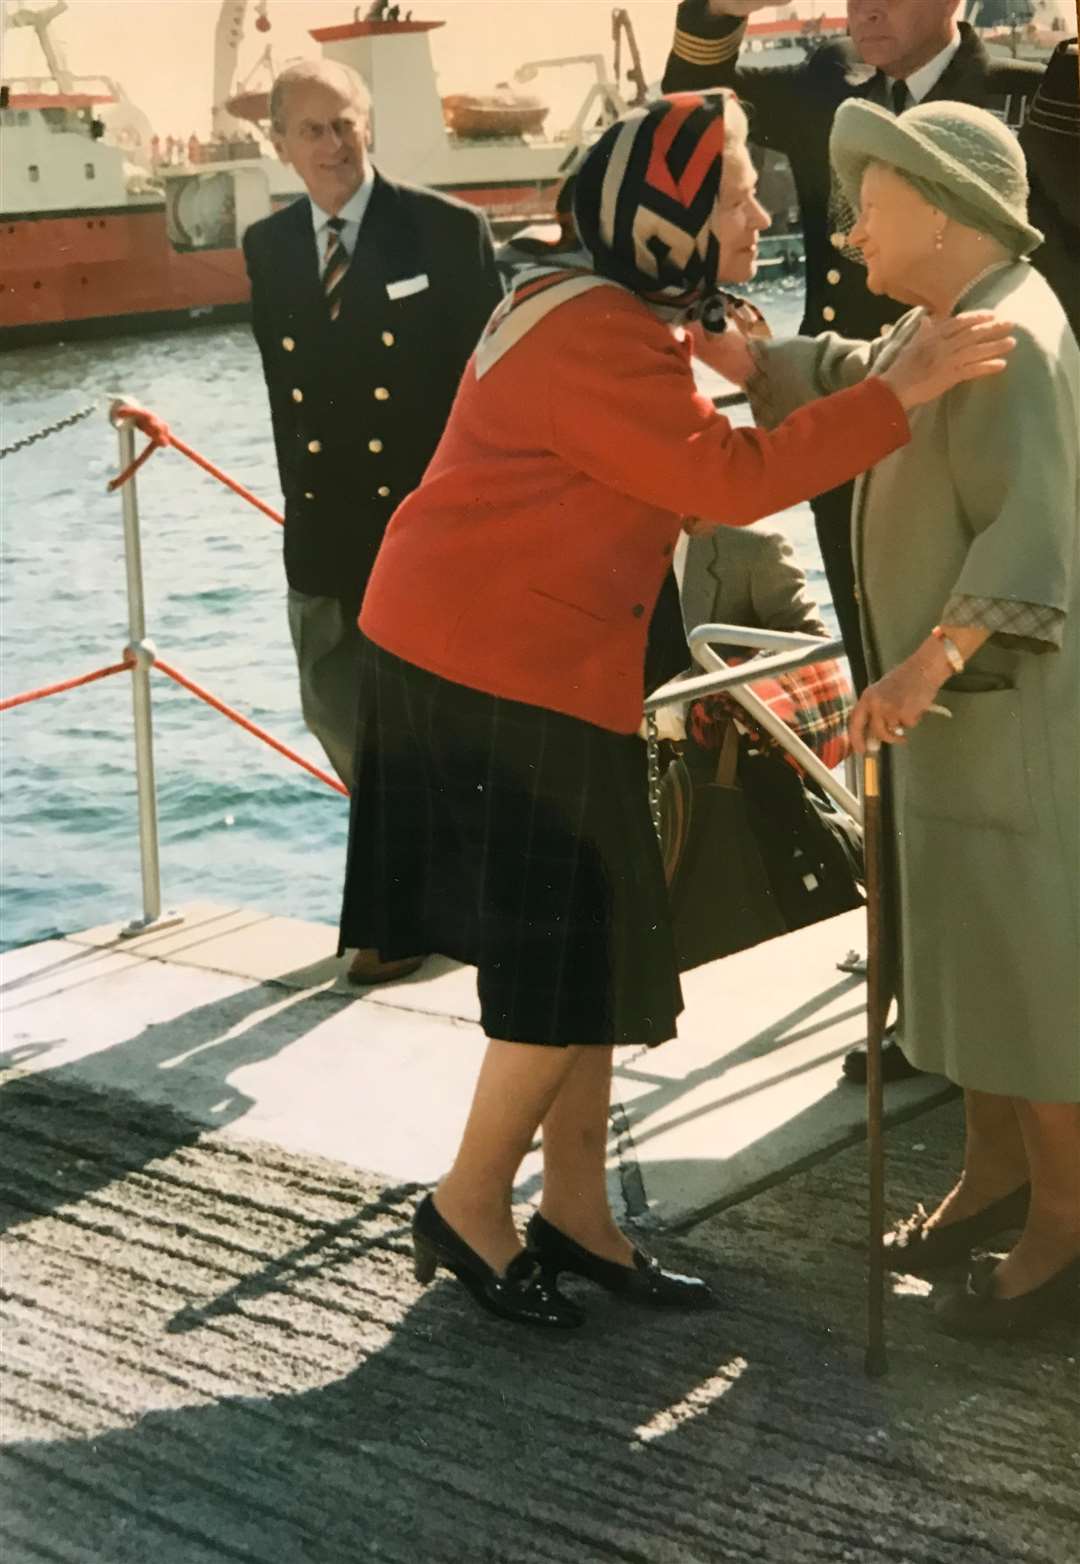 One of the photos from royal watcher Zena Sinclair's collection. It shows the Queen Mother and the Queen embracing at Scrabster quayside on August 16, 1997.